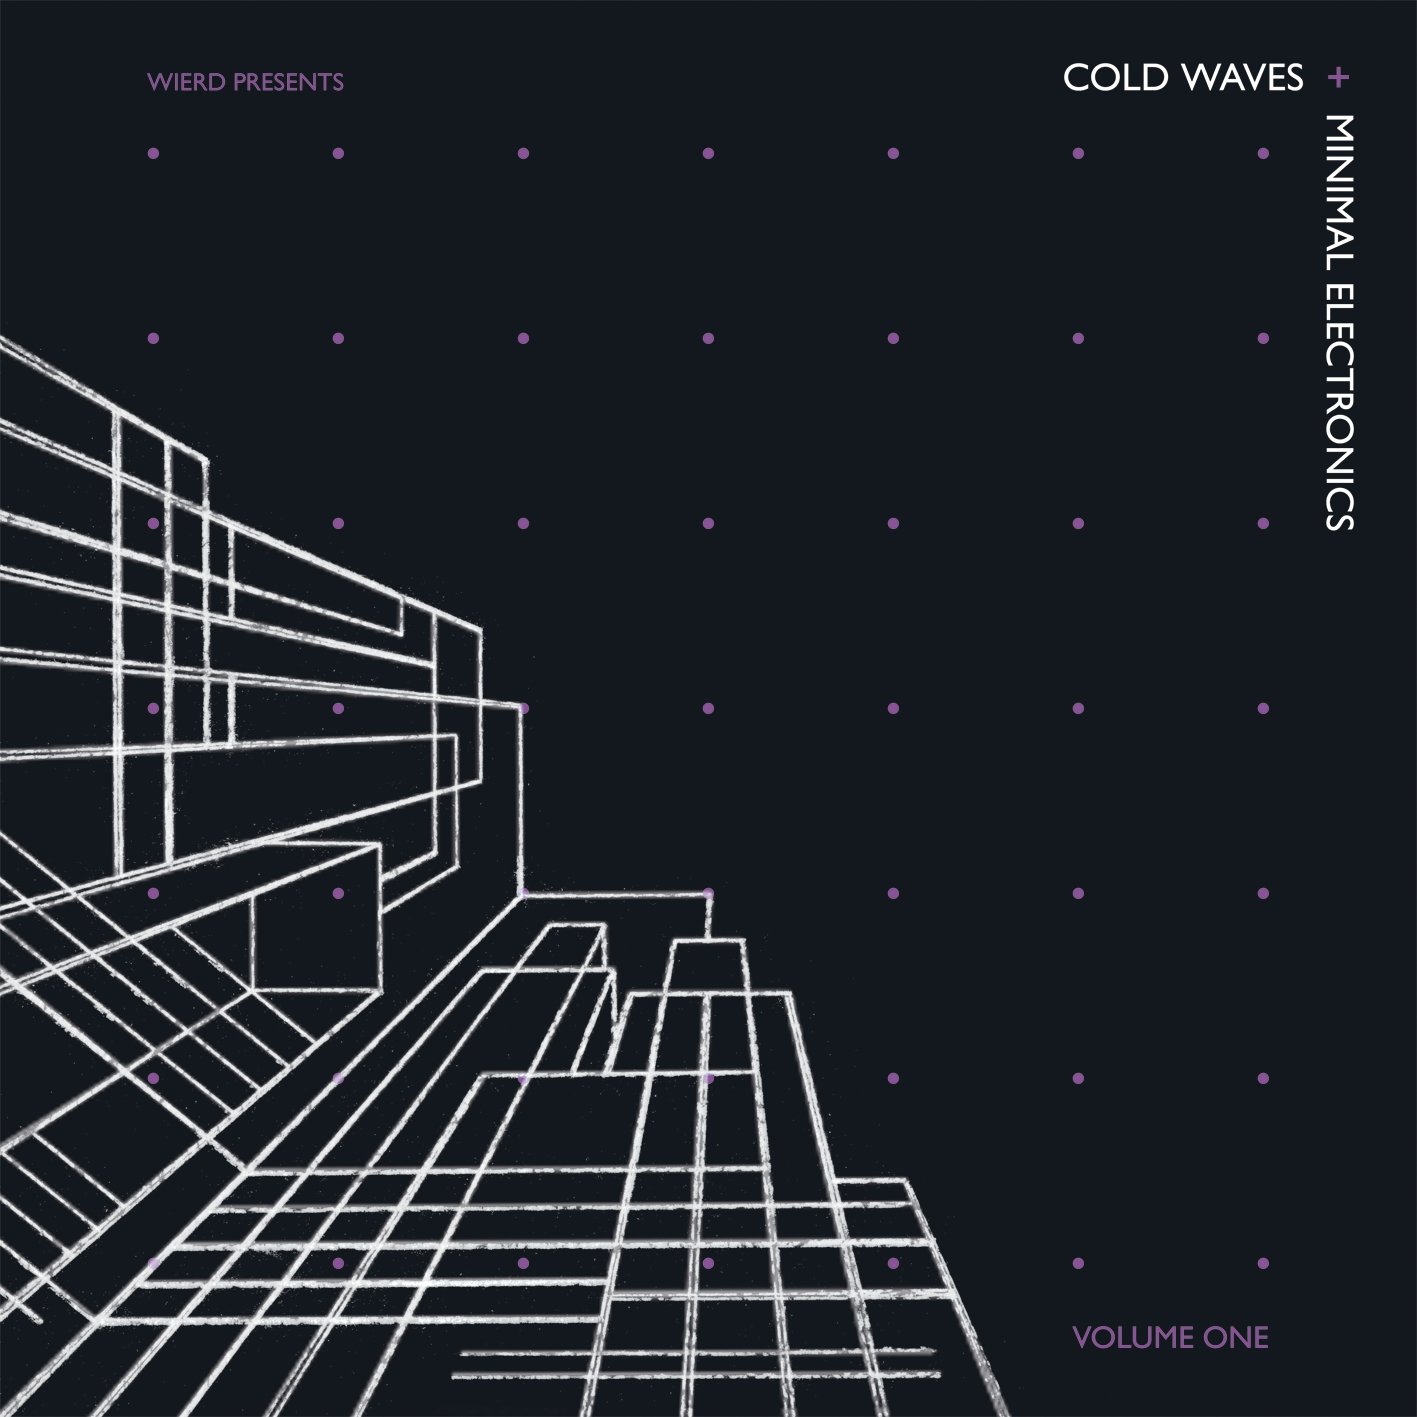 Cold waves. Linear Movement. Oto anyway 1984. Linear Movement Band. Anyway Oto обложка.